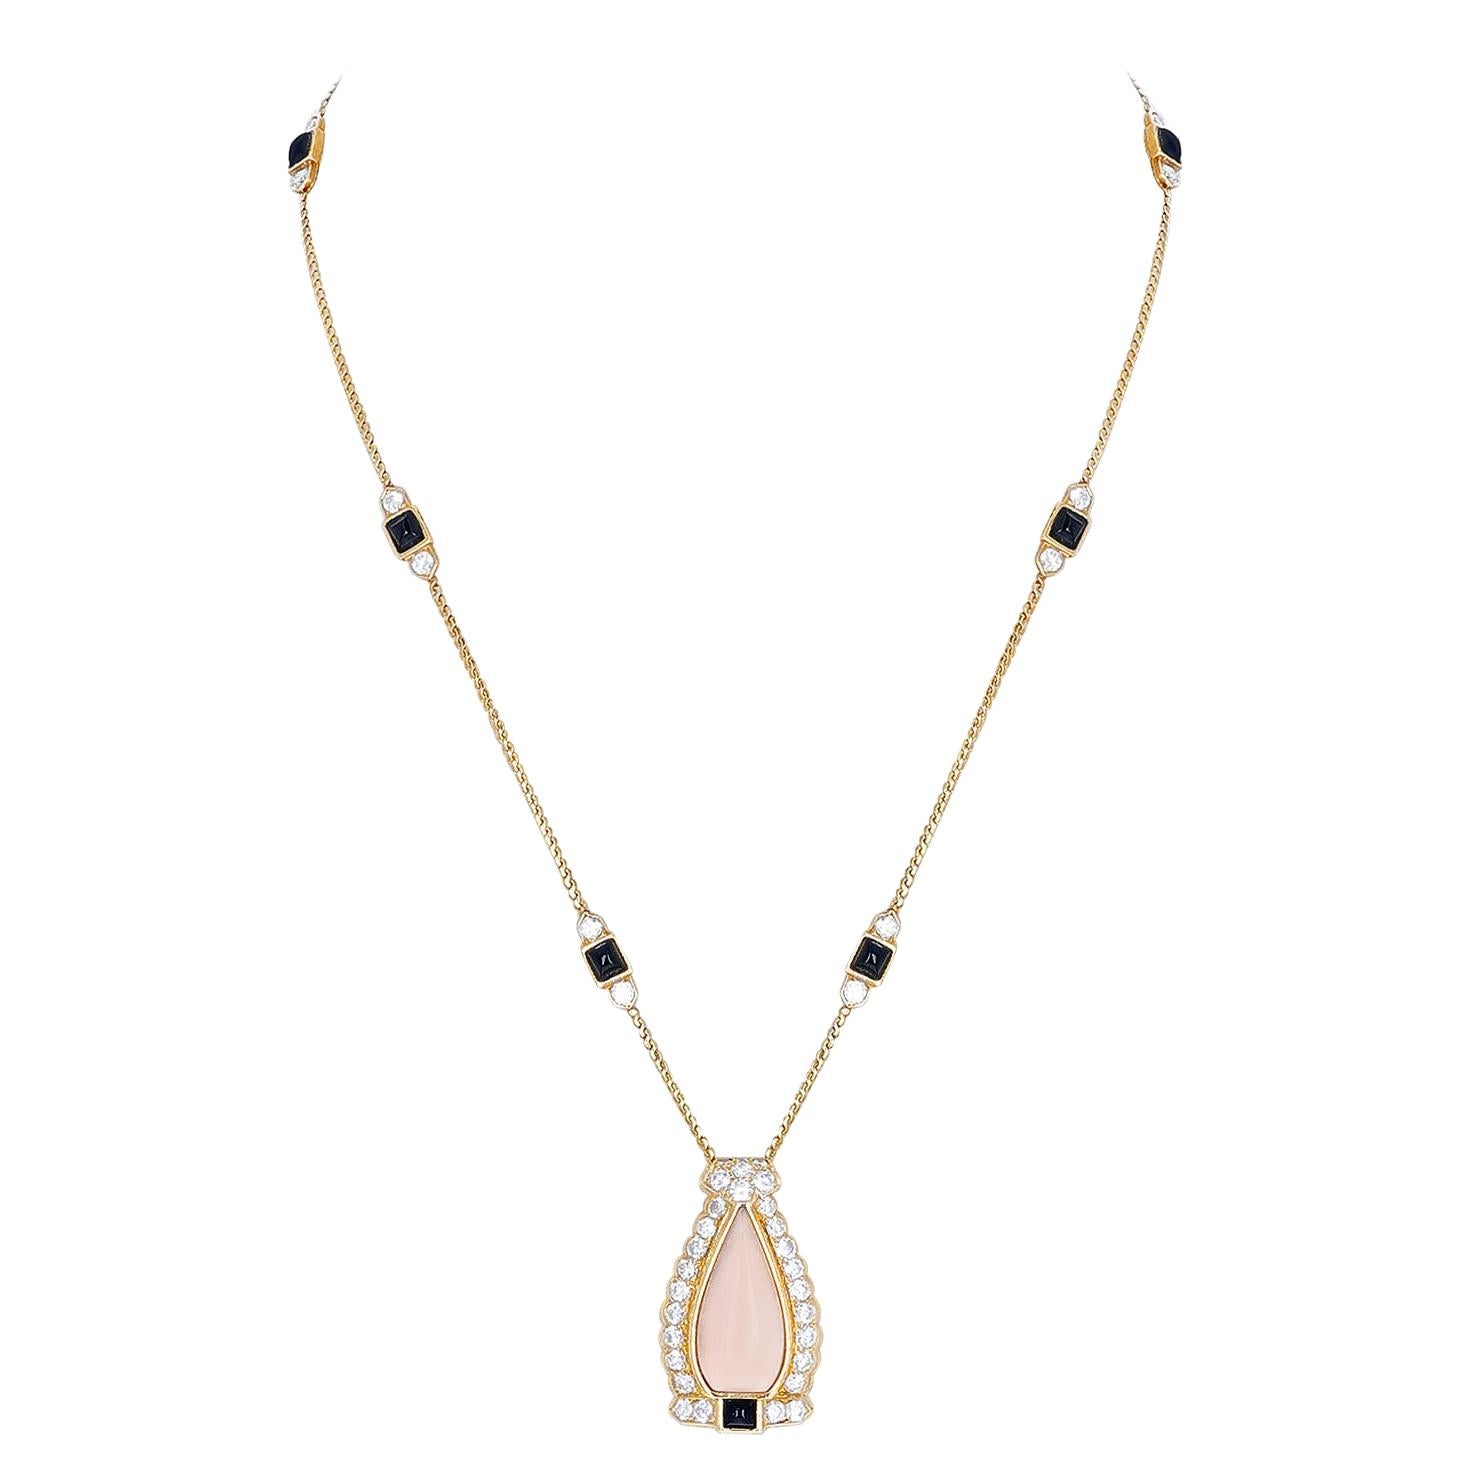 Cartier Coral, Onyx, and Diamond Necklace, 18k Yellow Gold